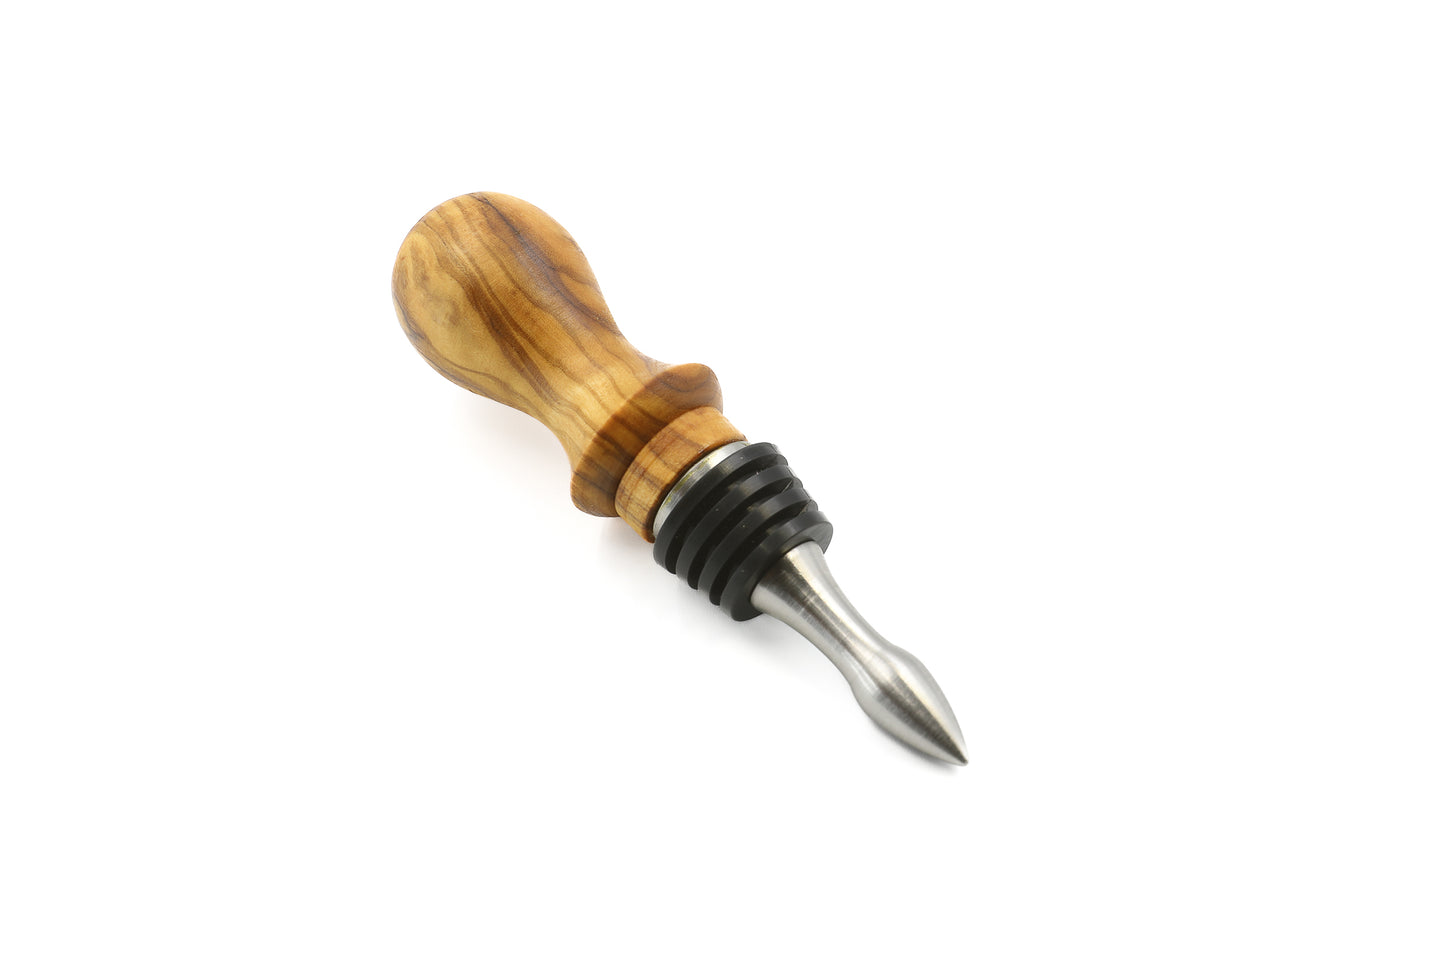 Handcrafted olive wood bottle stopper, a distinctive choice